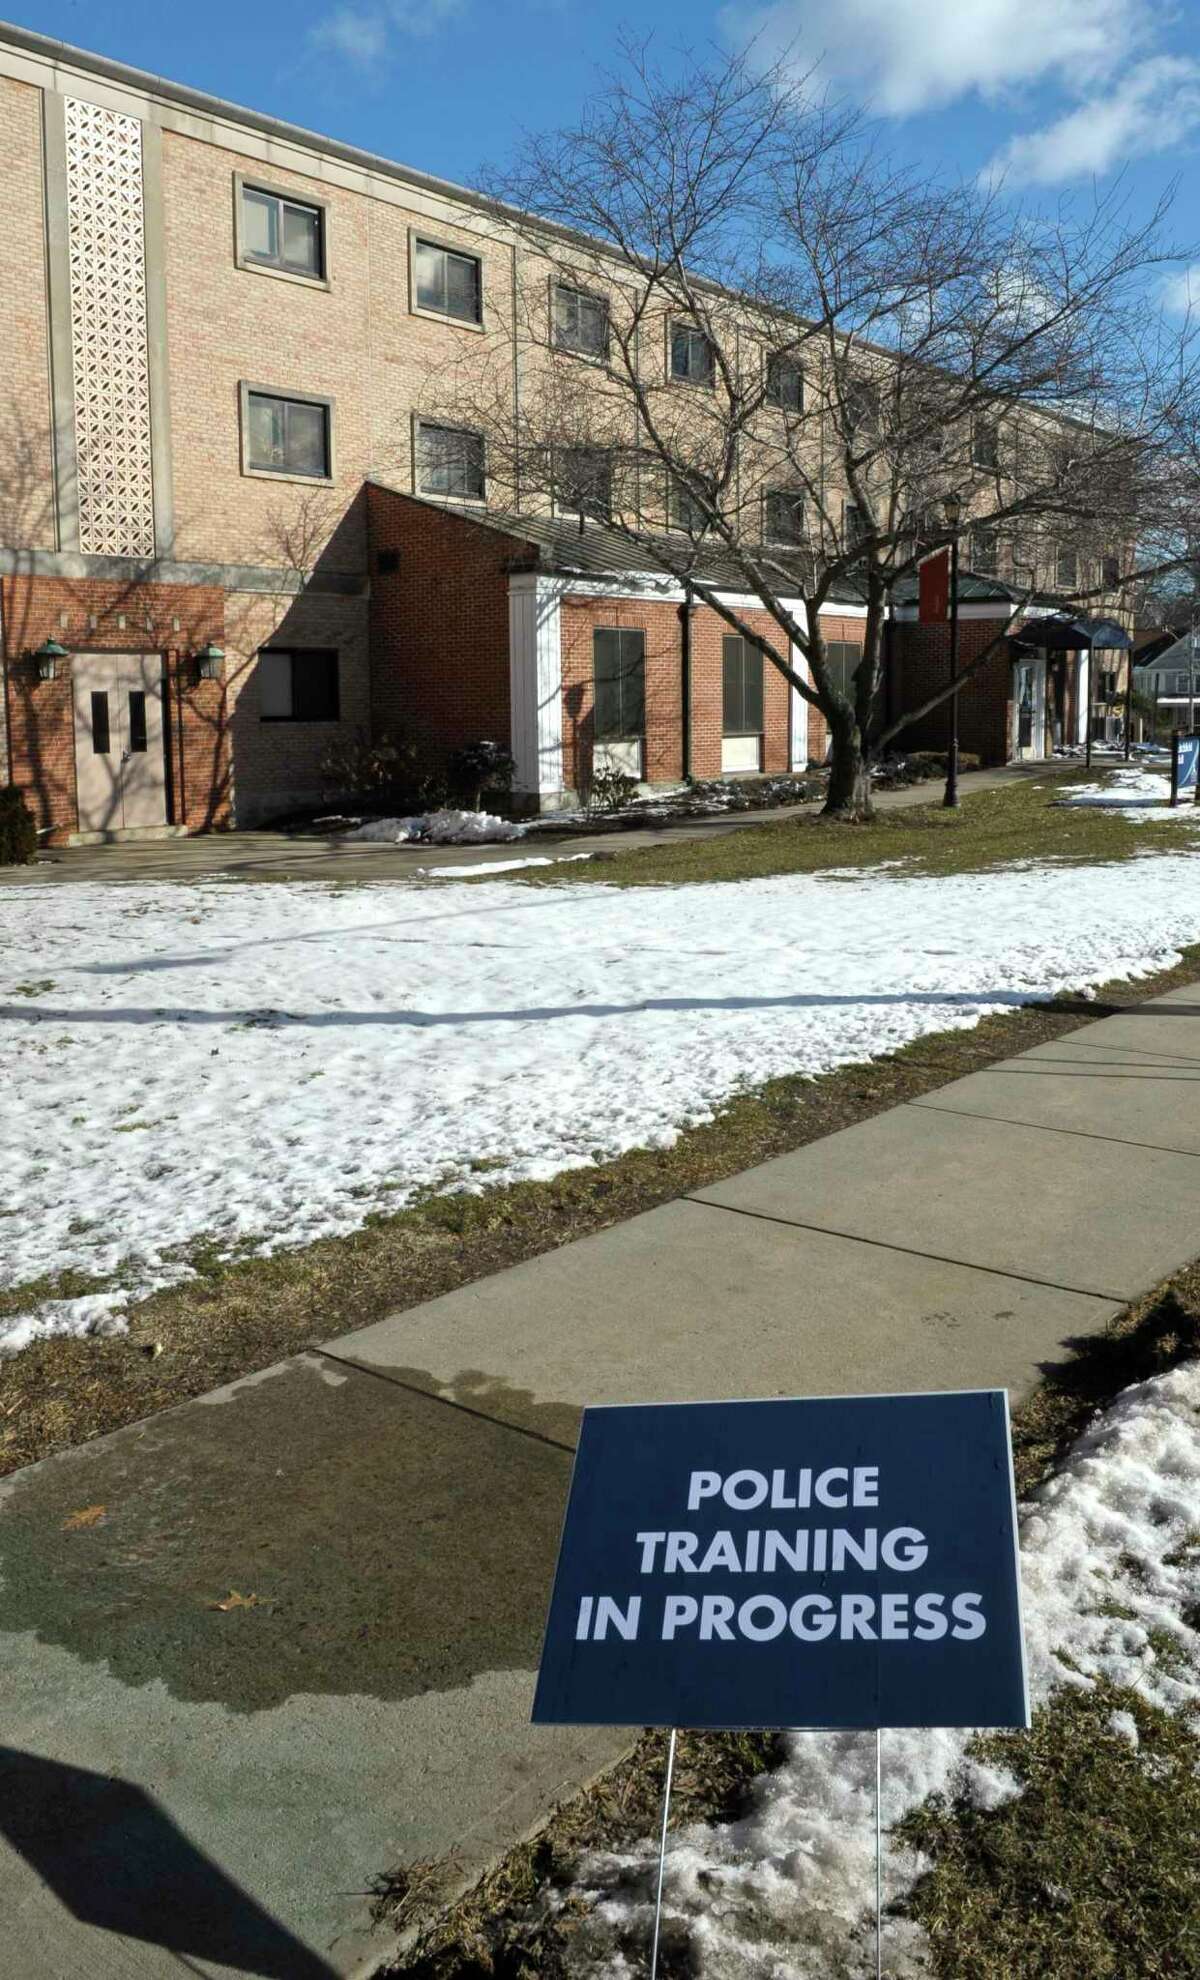 The Western Connecticut State University Police Department conducted a live shooting exercise with Danbury and other area police departments at the WCSU midtown campus on Thursday, February 11, 2016, in Danbury, Conn. The training drill took place in the university's Litchfield Hall dormitory building.